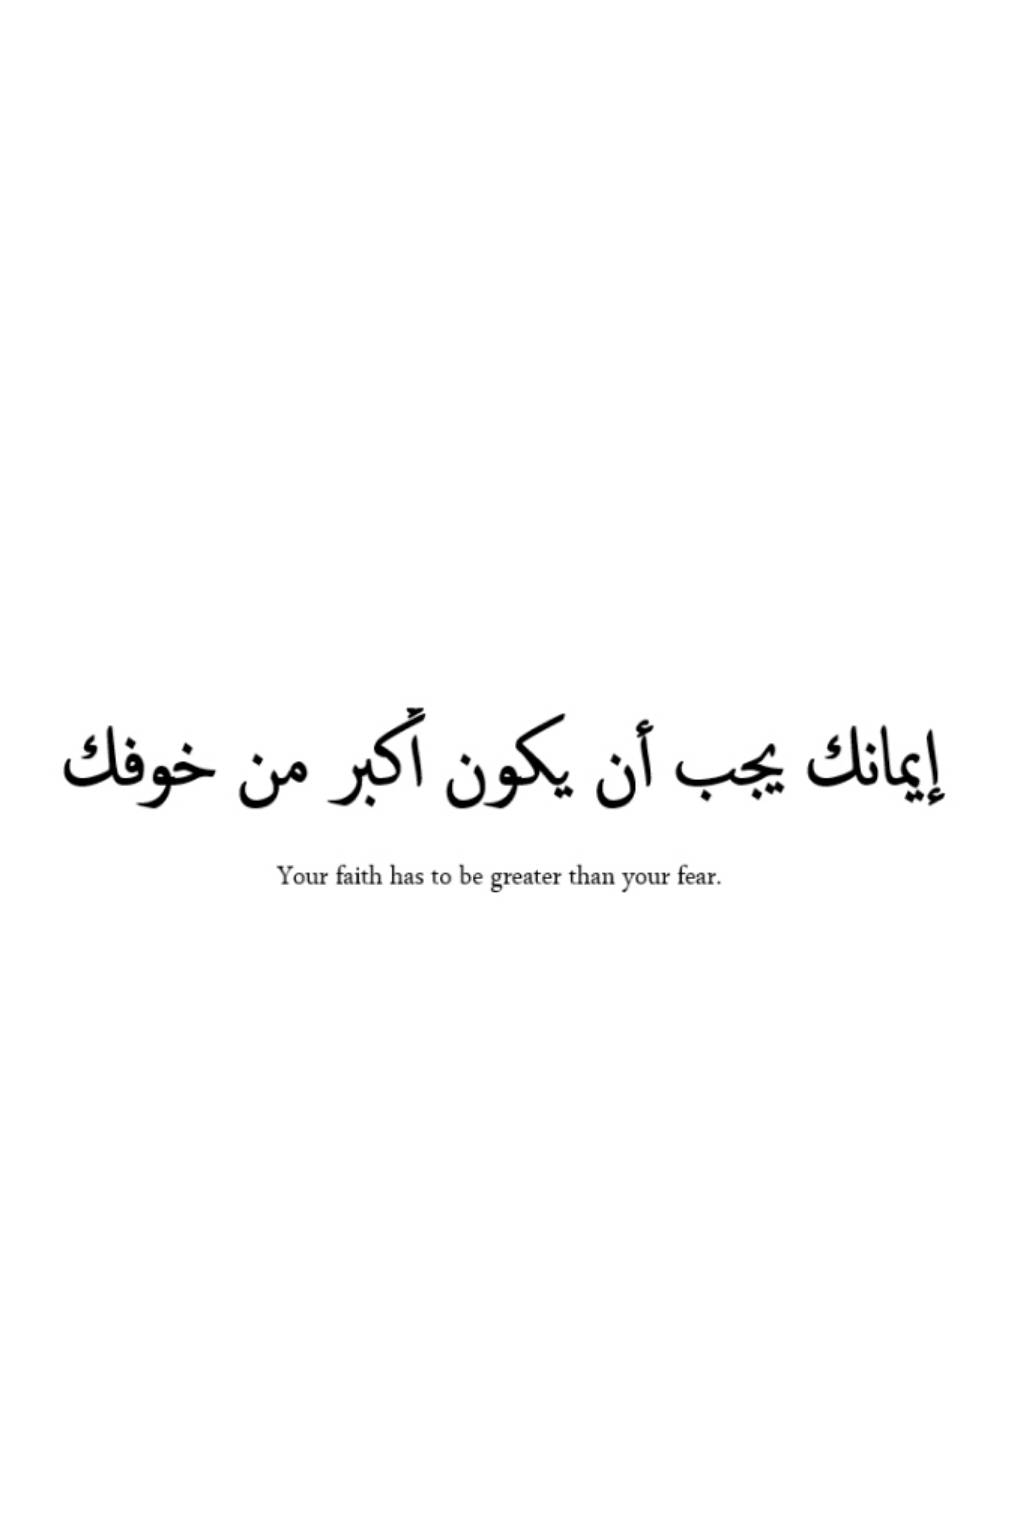 Quotes About Family In Arabic Quotesgram